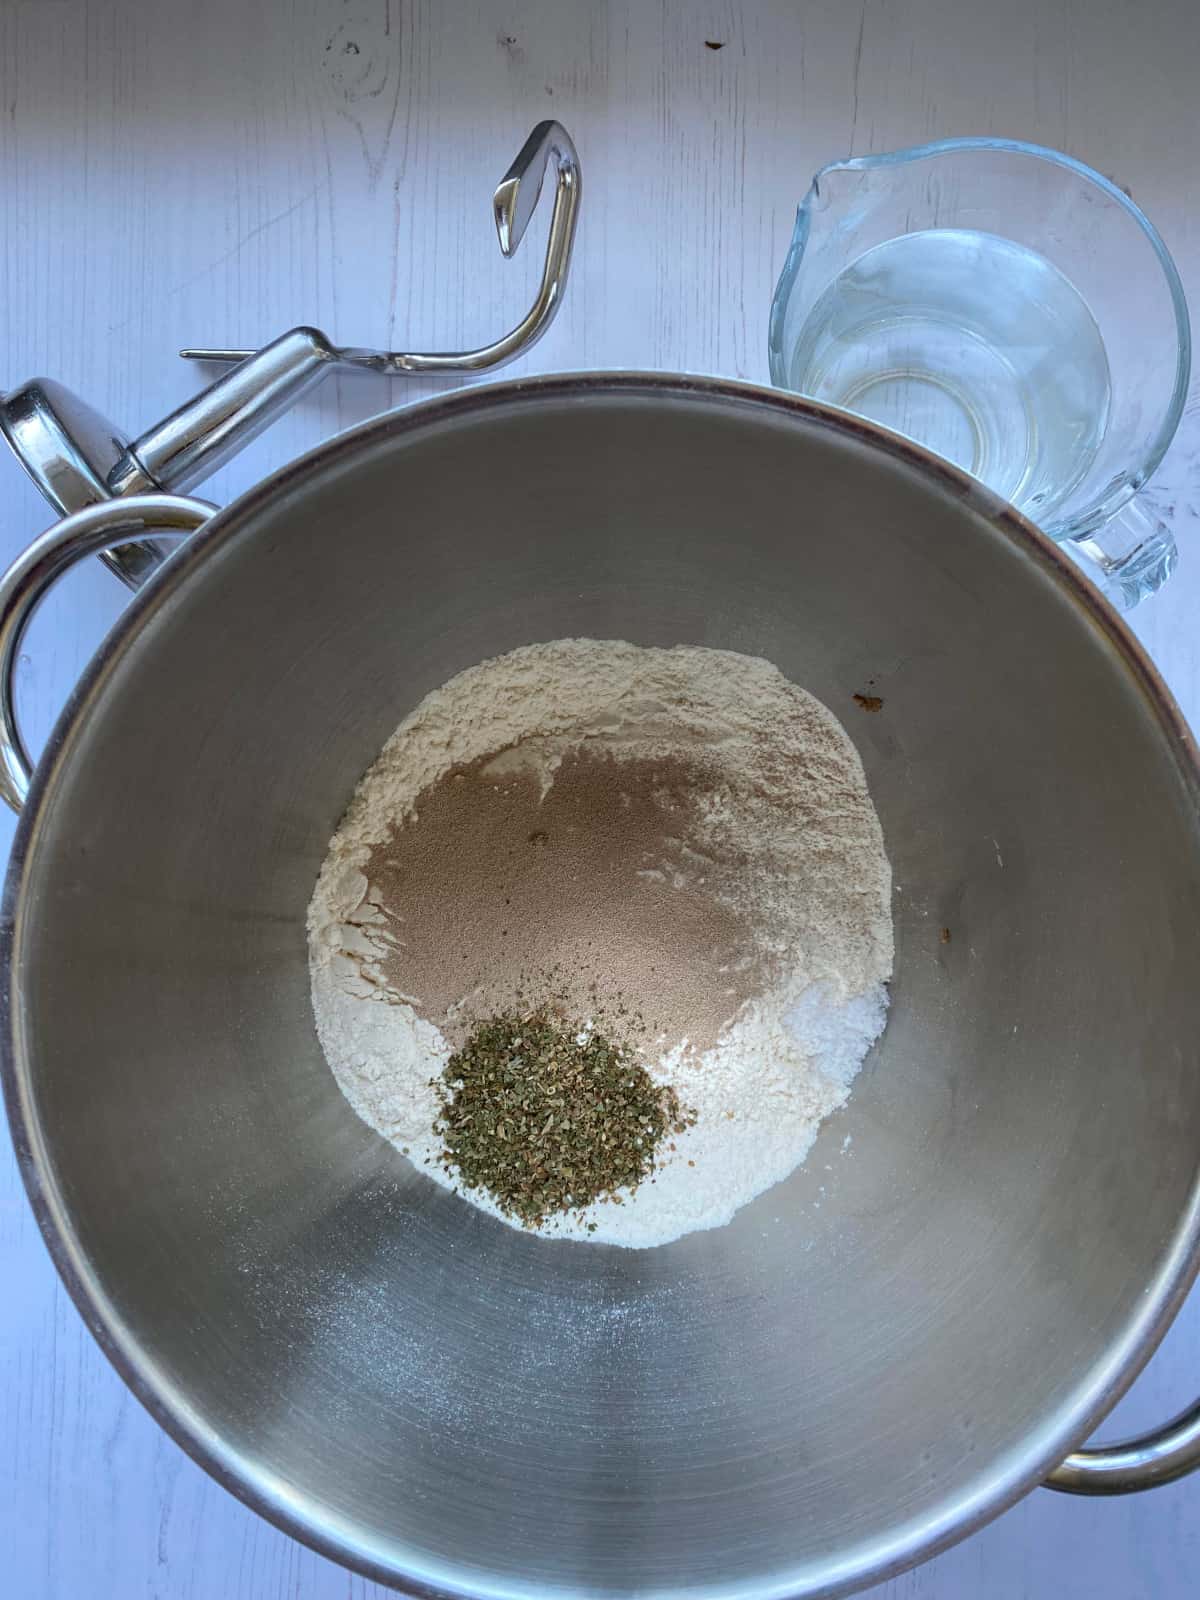 Dry Ingredients in a bowl, with a jug of water and a dough hook on the side.